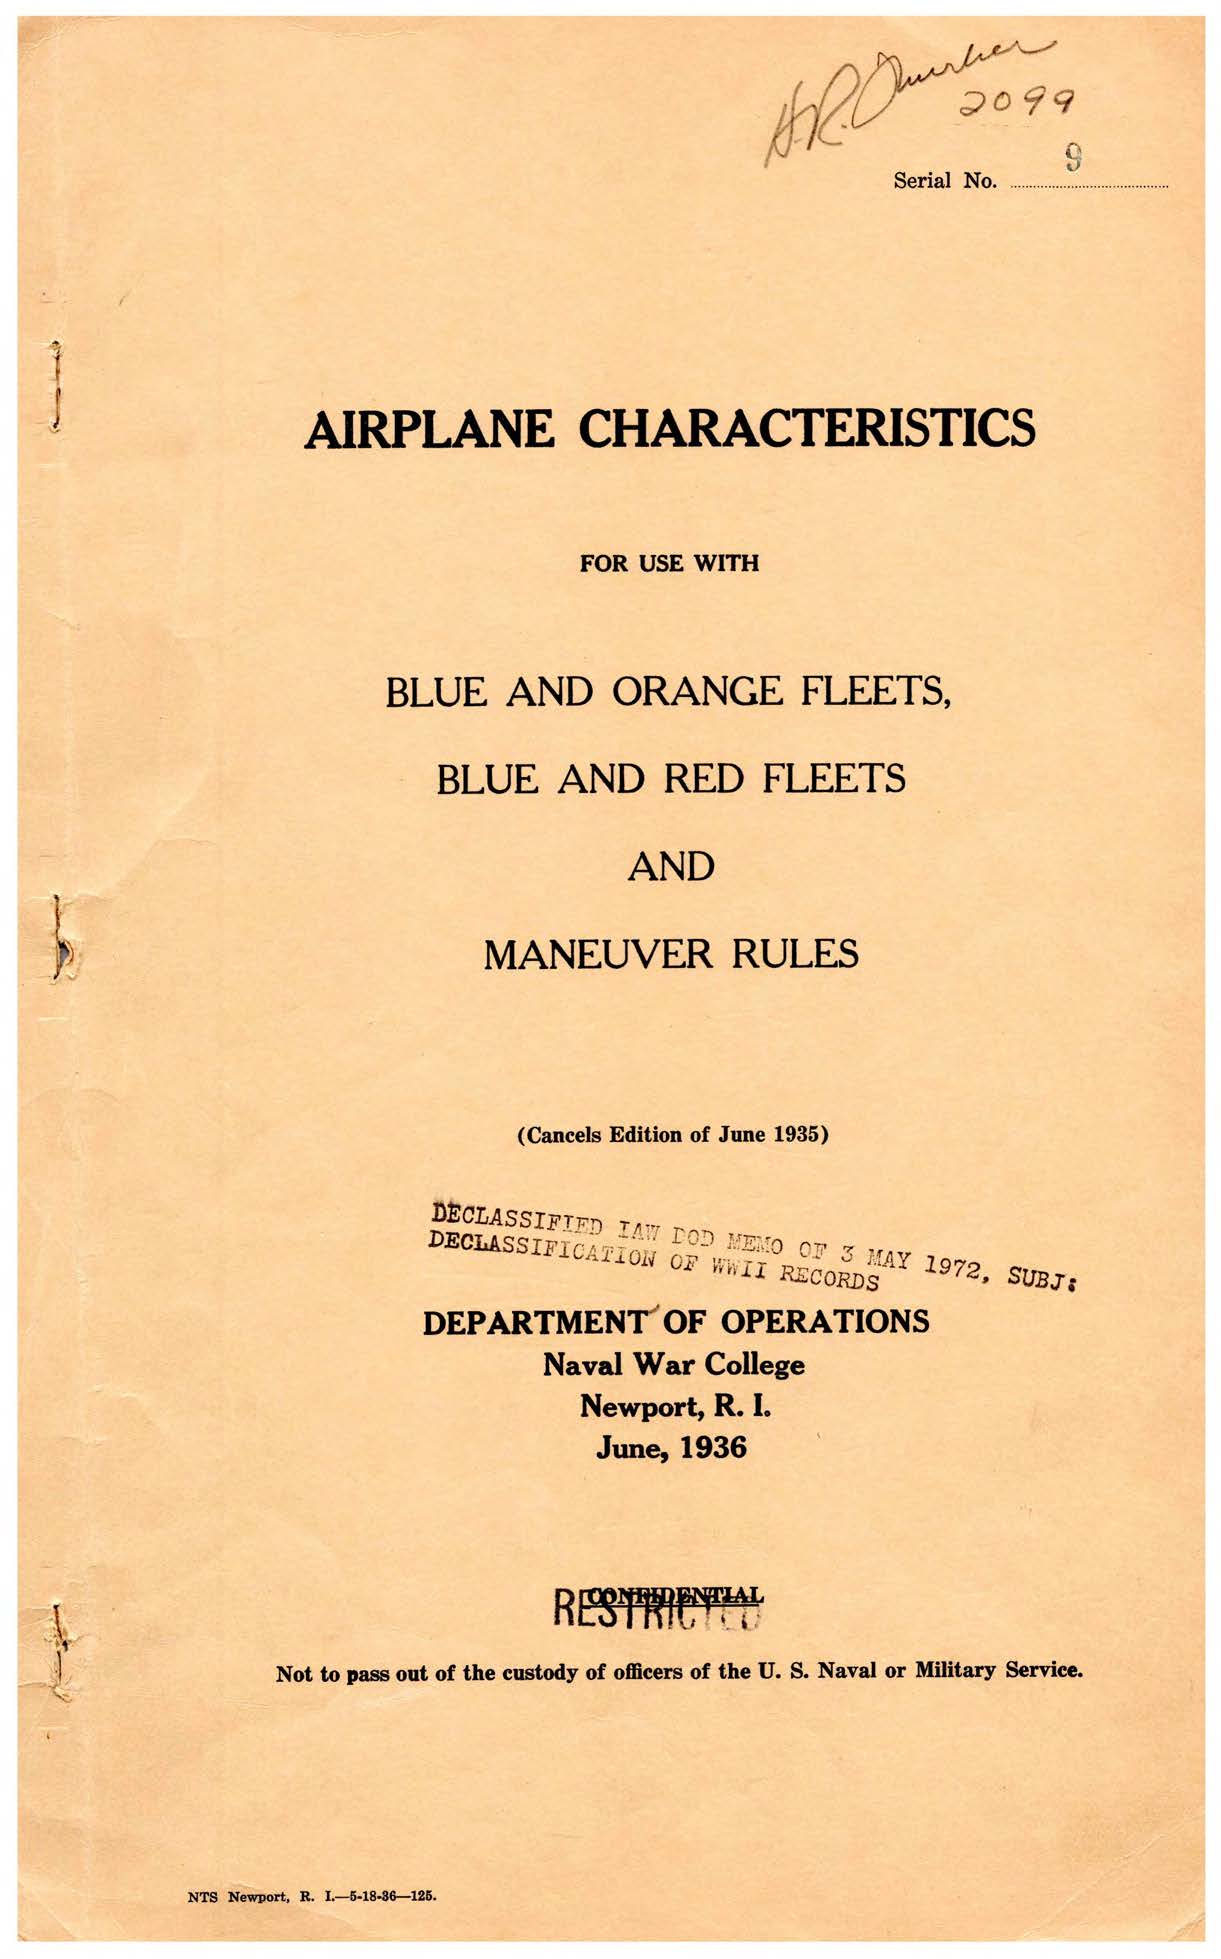 Airplane Characteristics for use with Blue and Orange Fleets, Blue and Red Fleets and Maneuver Rules